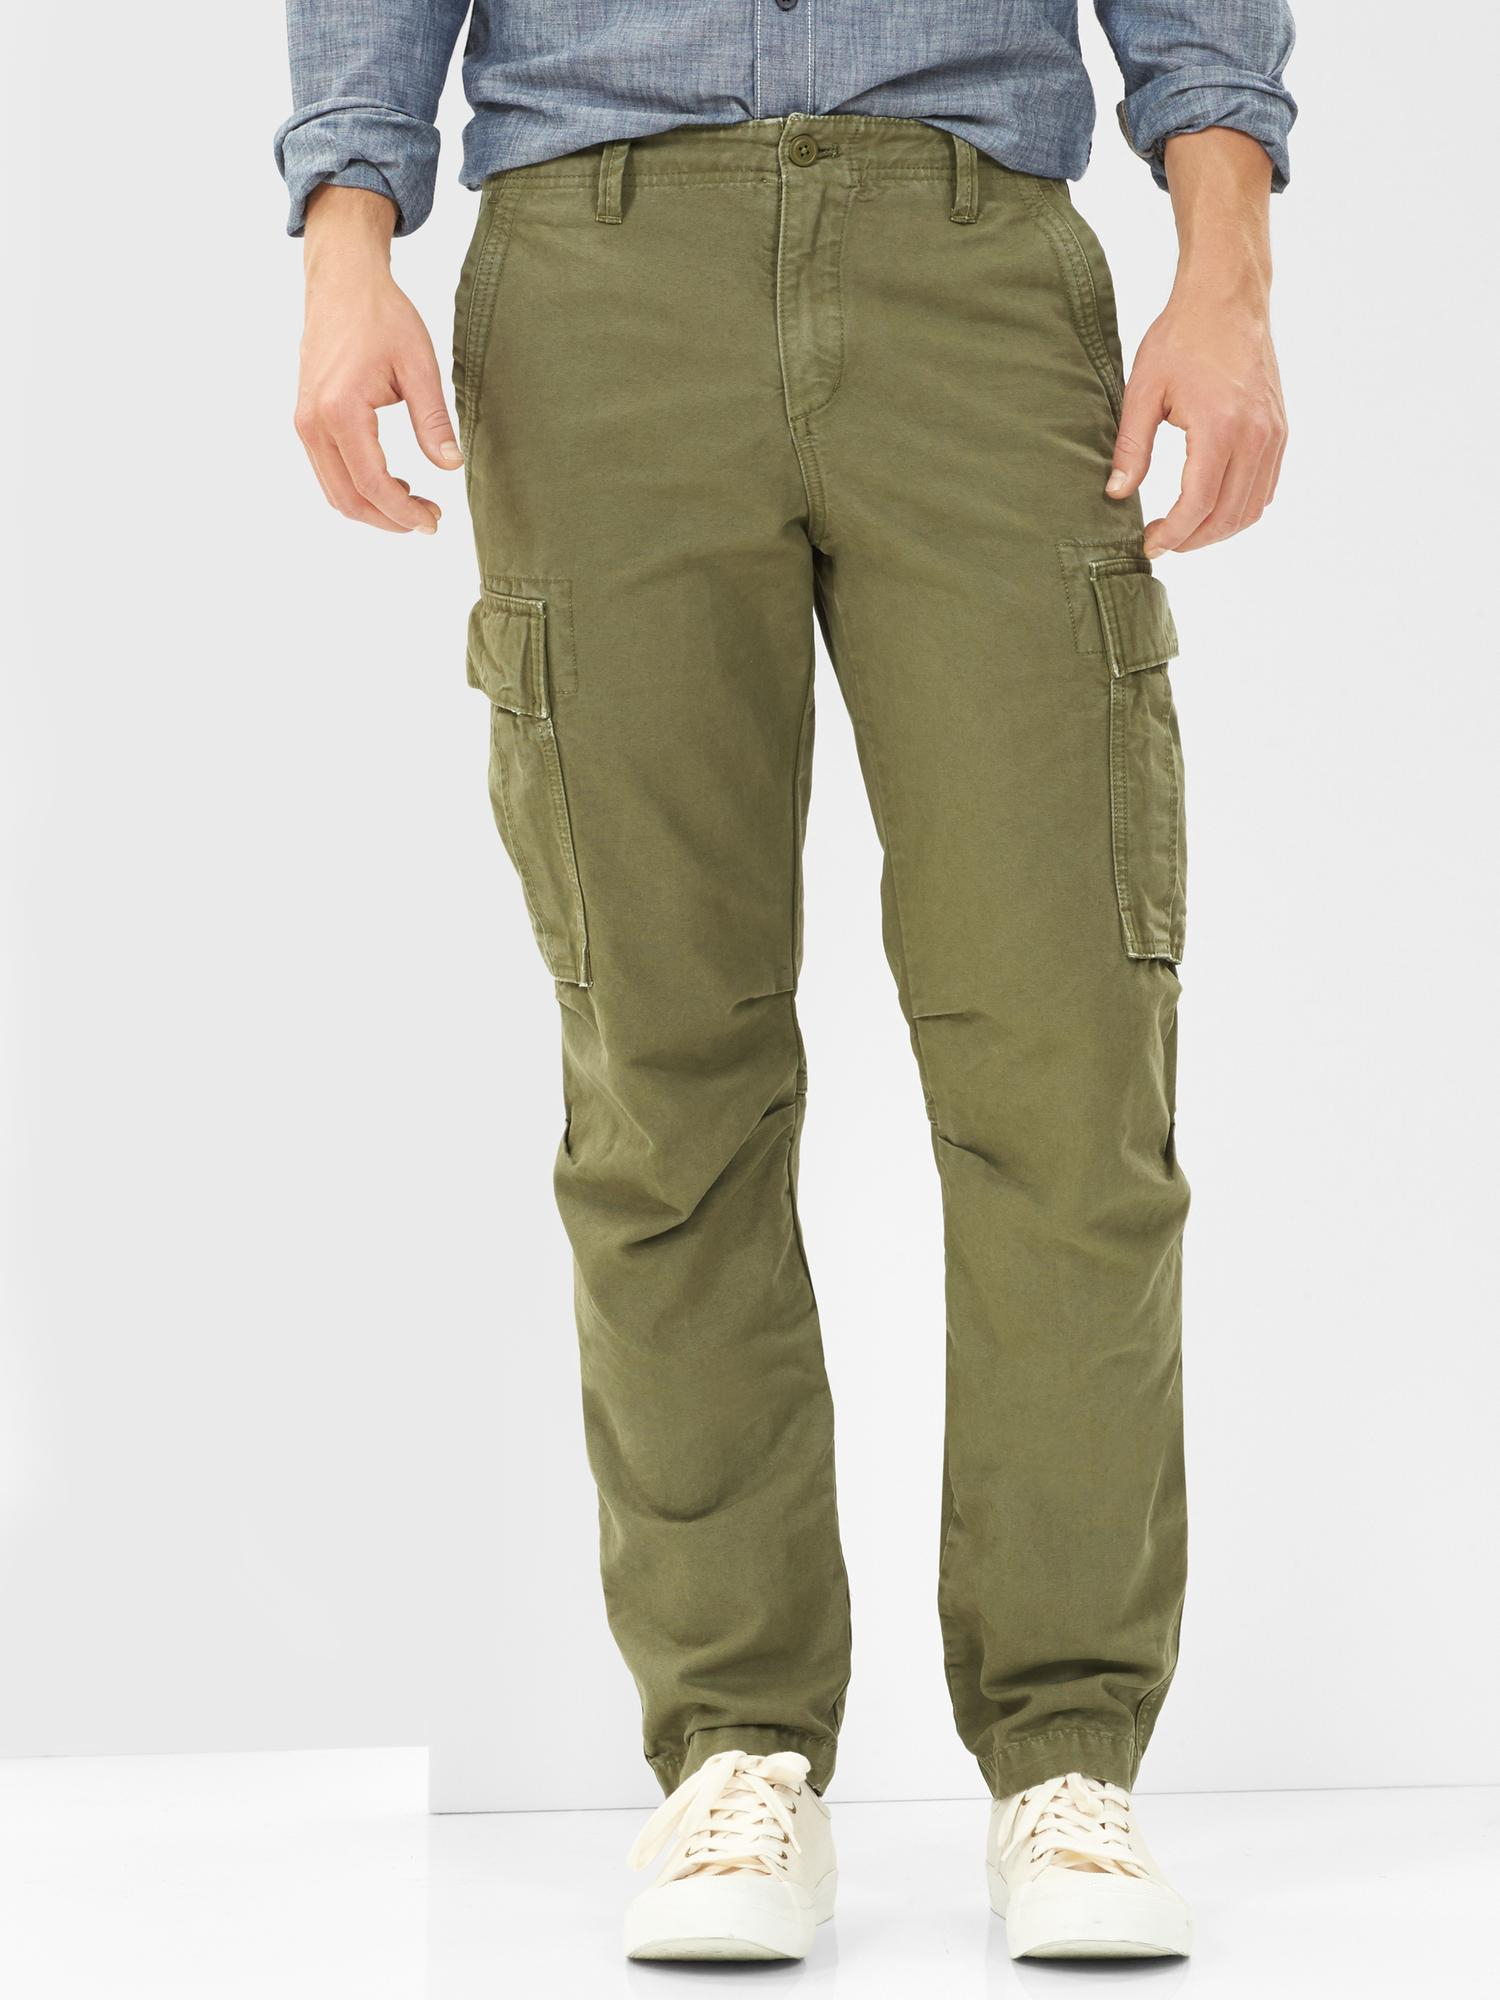 Cargo Pants For Men - Buy Vomint New Men Fashion Military Cargo Pants ...